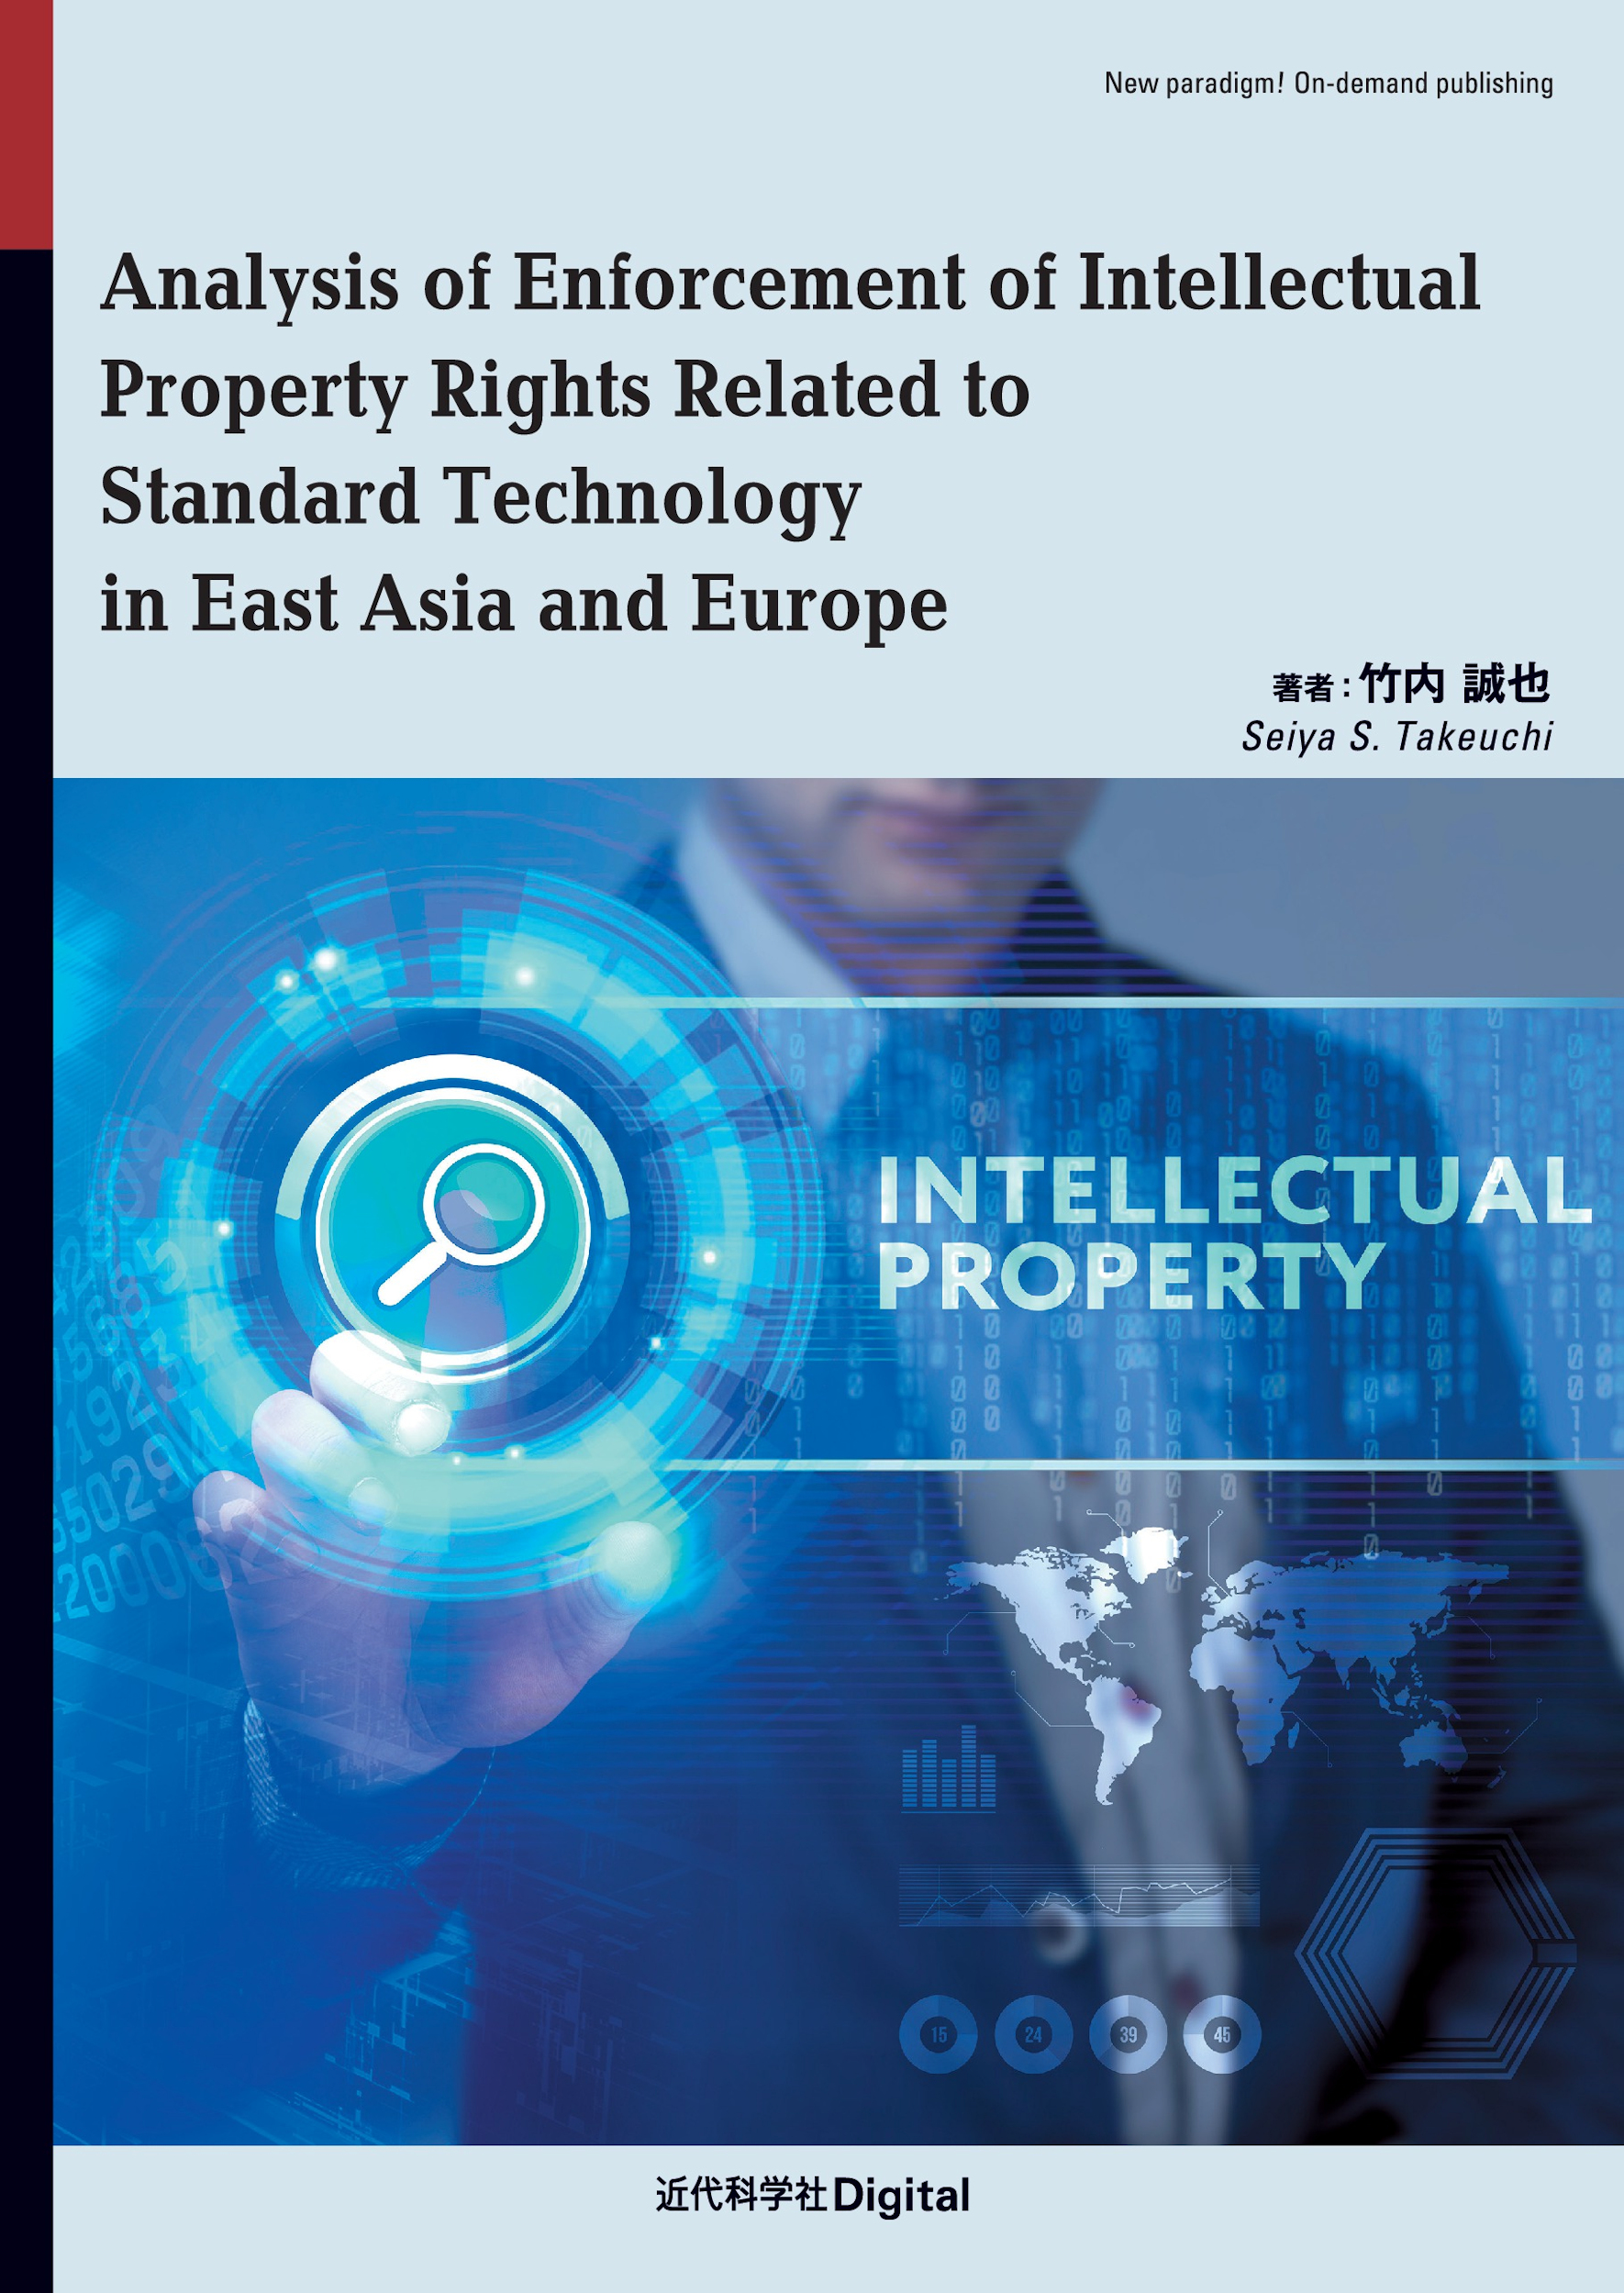 Analysis　of　Enforcement　of　Intellectual　Property　Rights　Related　to　Standard　Technology　in　East　Asia　and　Europeの商品画像